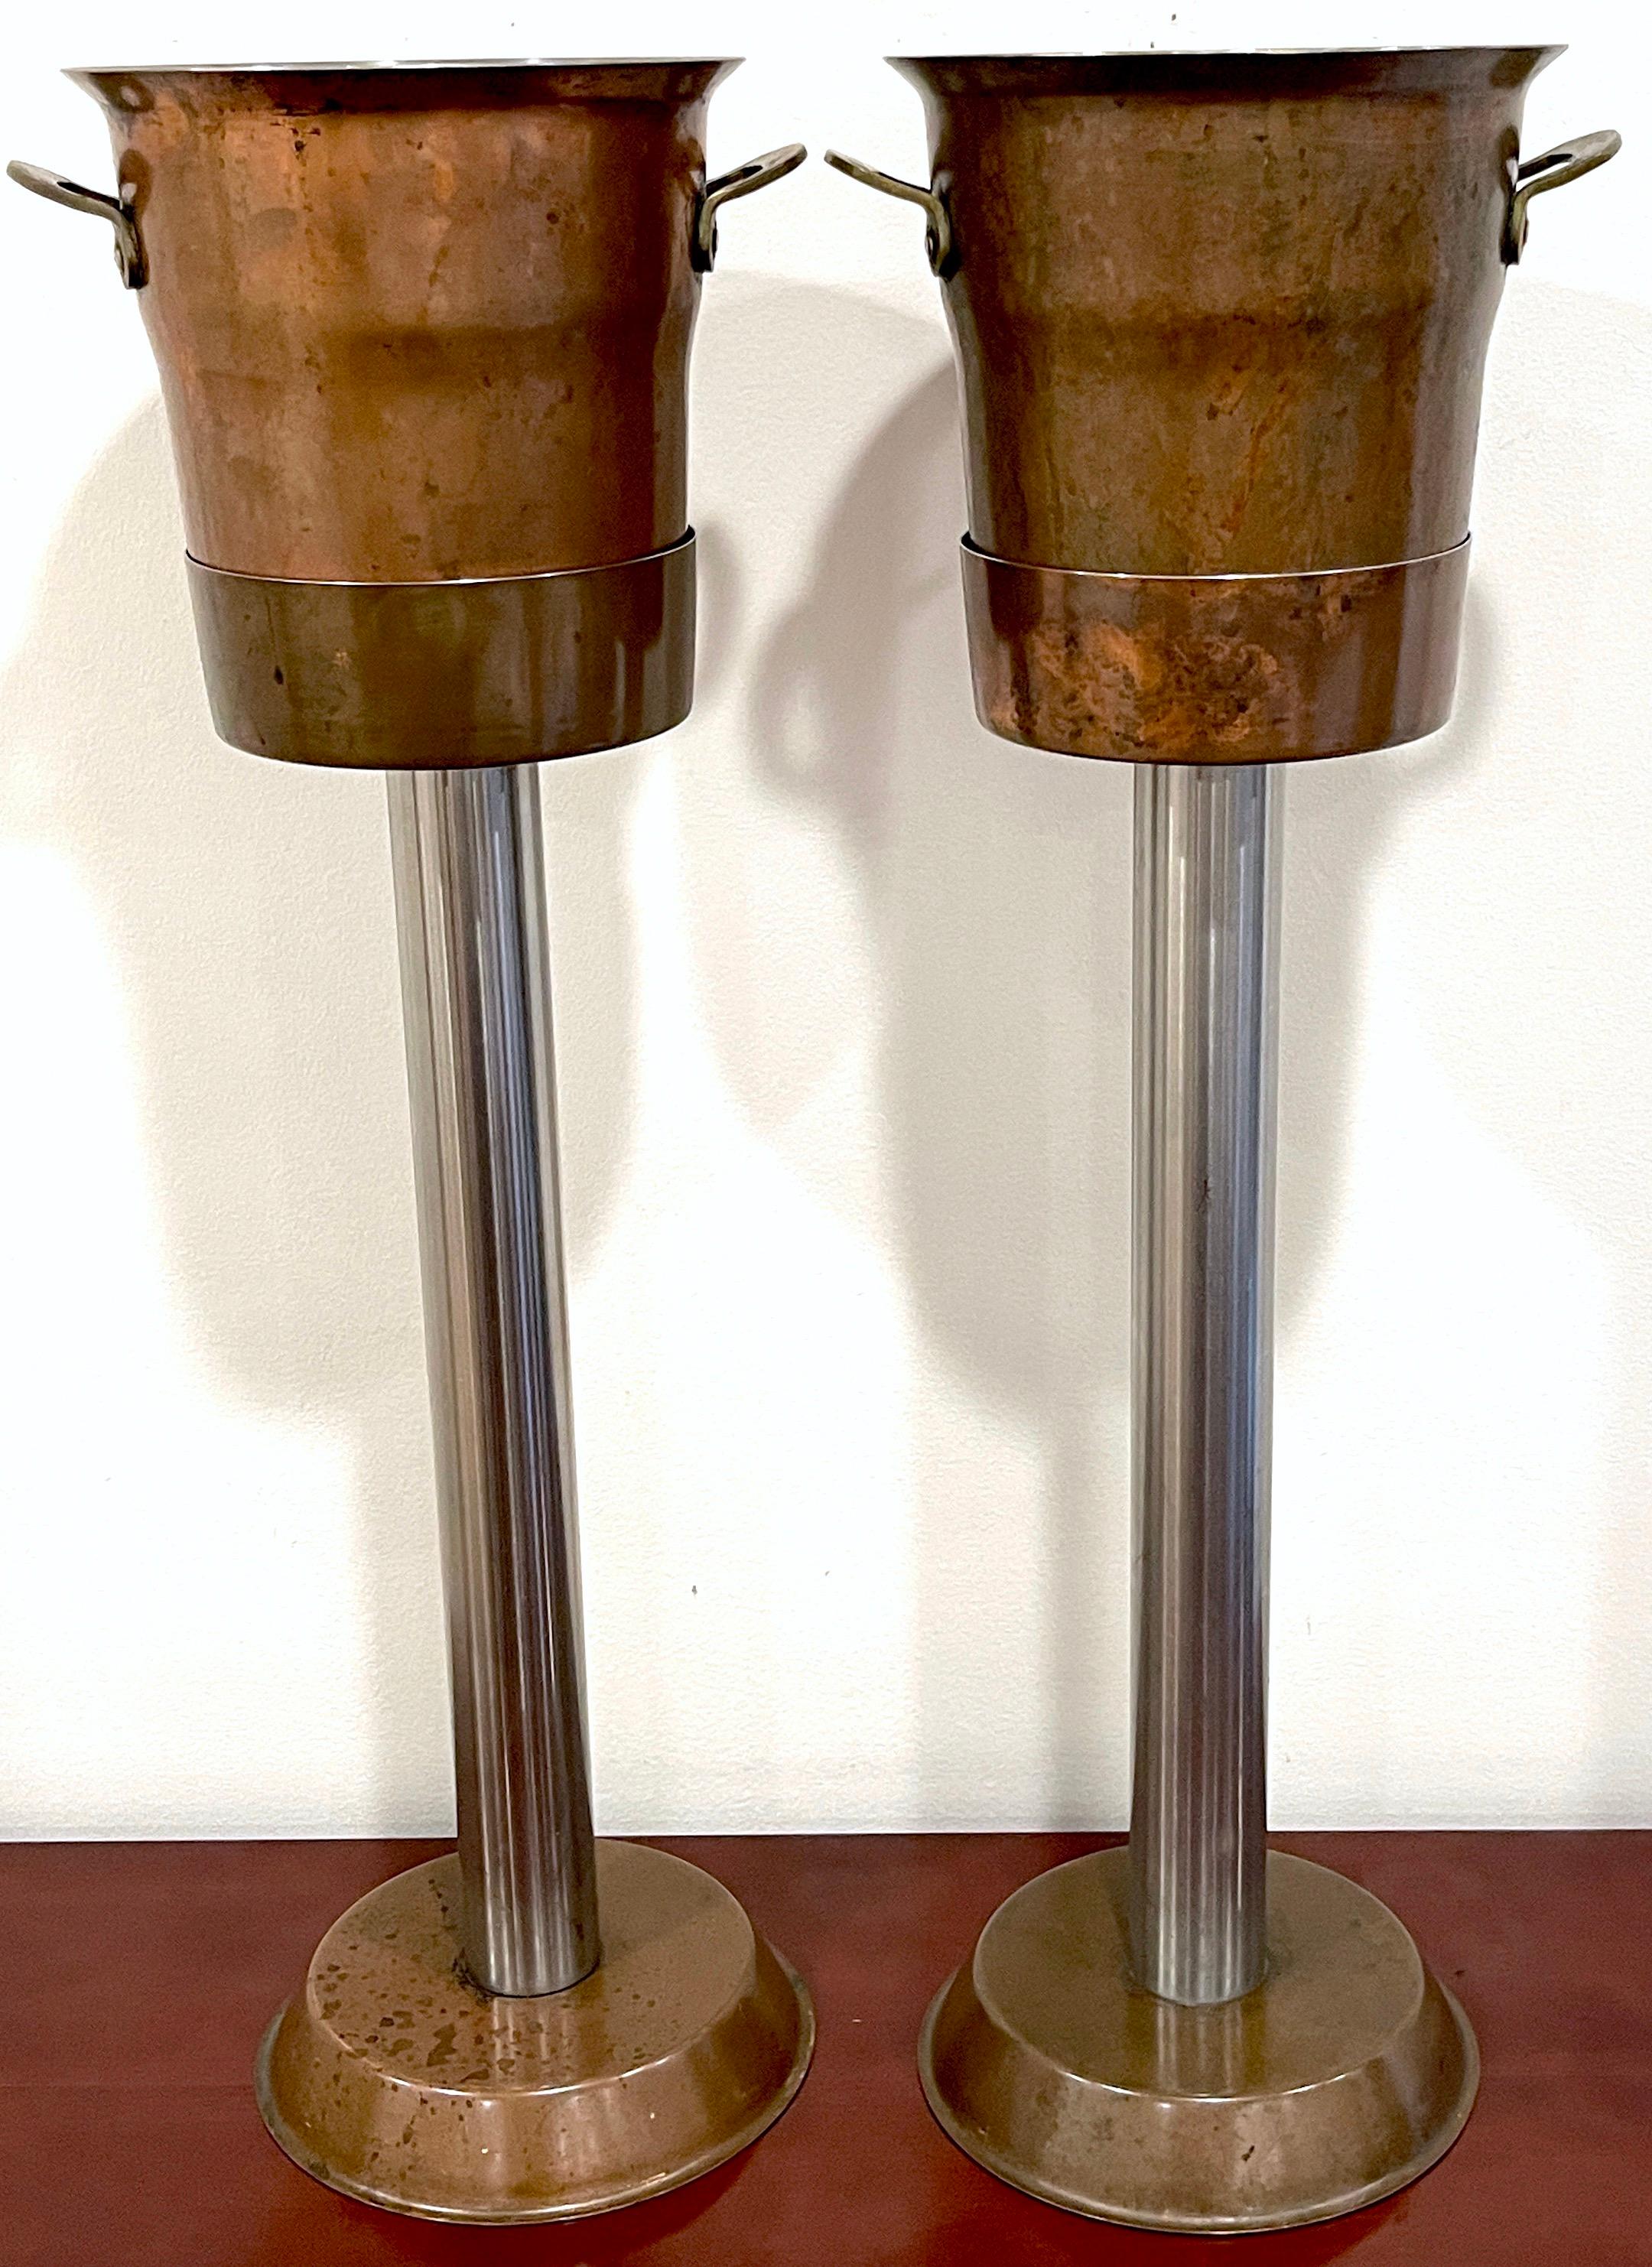 Pair of Hotel Copper & Steel Champagne Buckets & Stands, by Spring Culinox
Switzerland, Circa 1960s 
A exceptional pair of vintage Hotel Copper & Steel Champagne Buckets with Stands, made by the renowned Spring Culinox in Switzerland during the